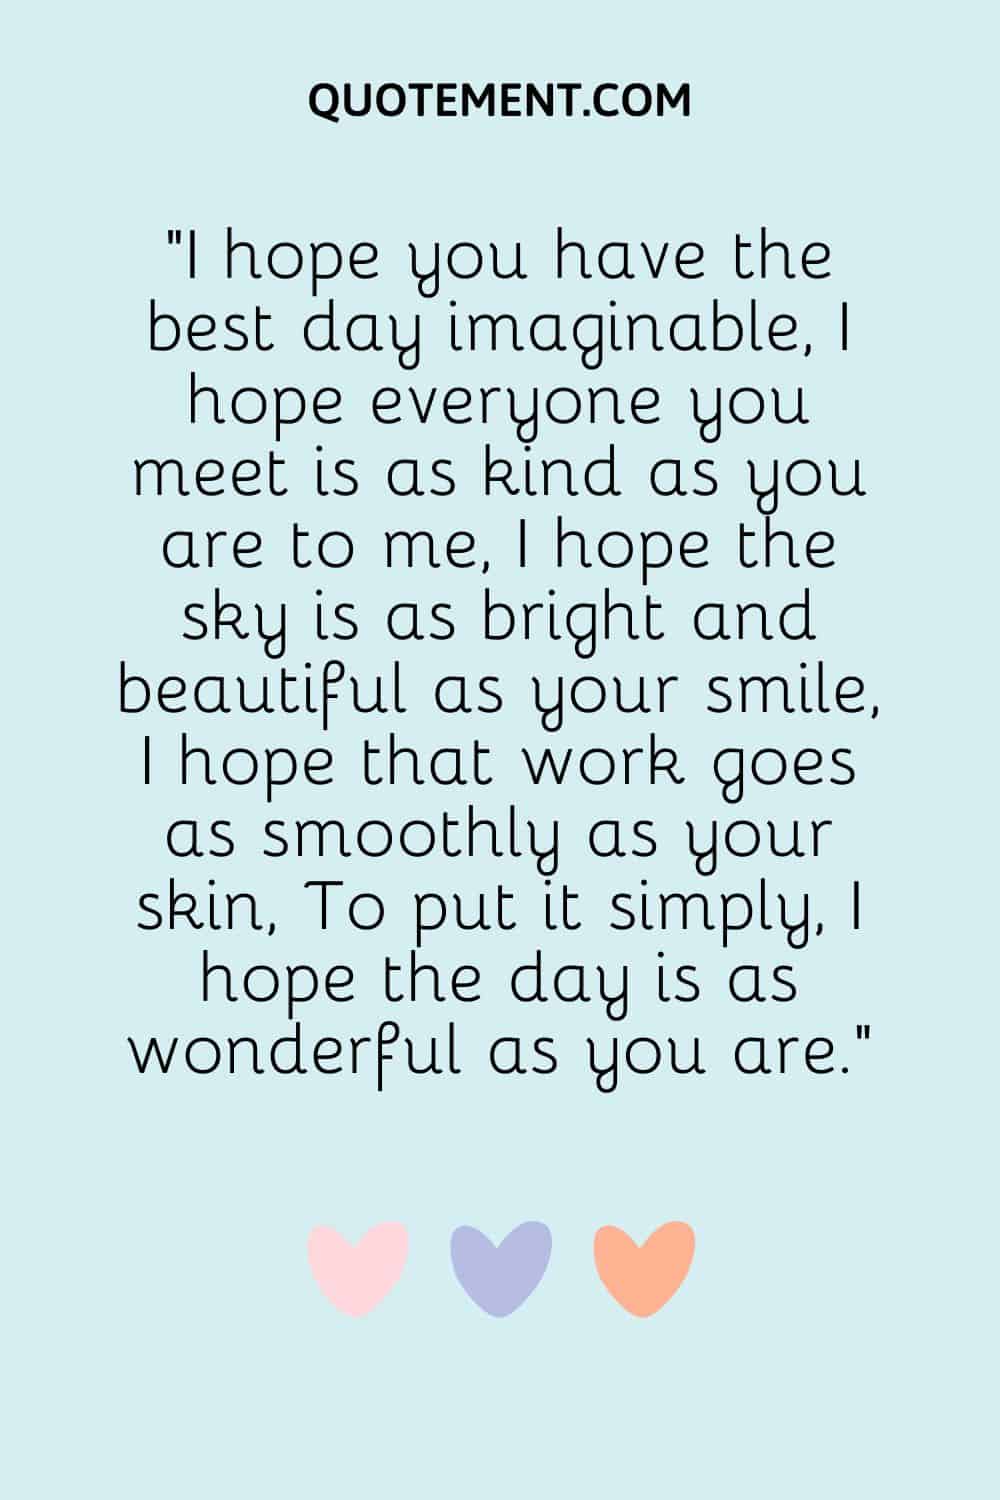 I hope you have the best day imaginable